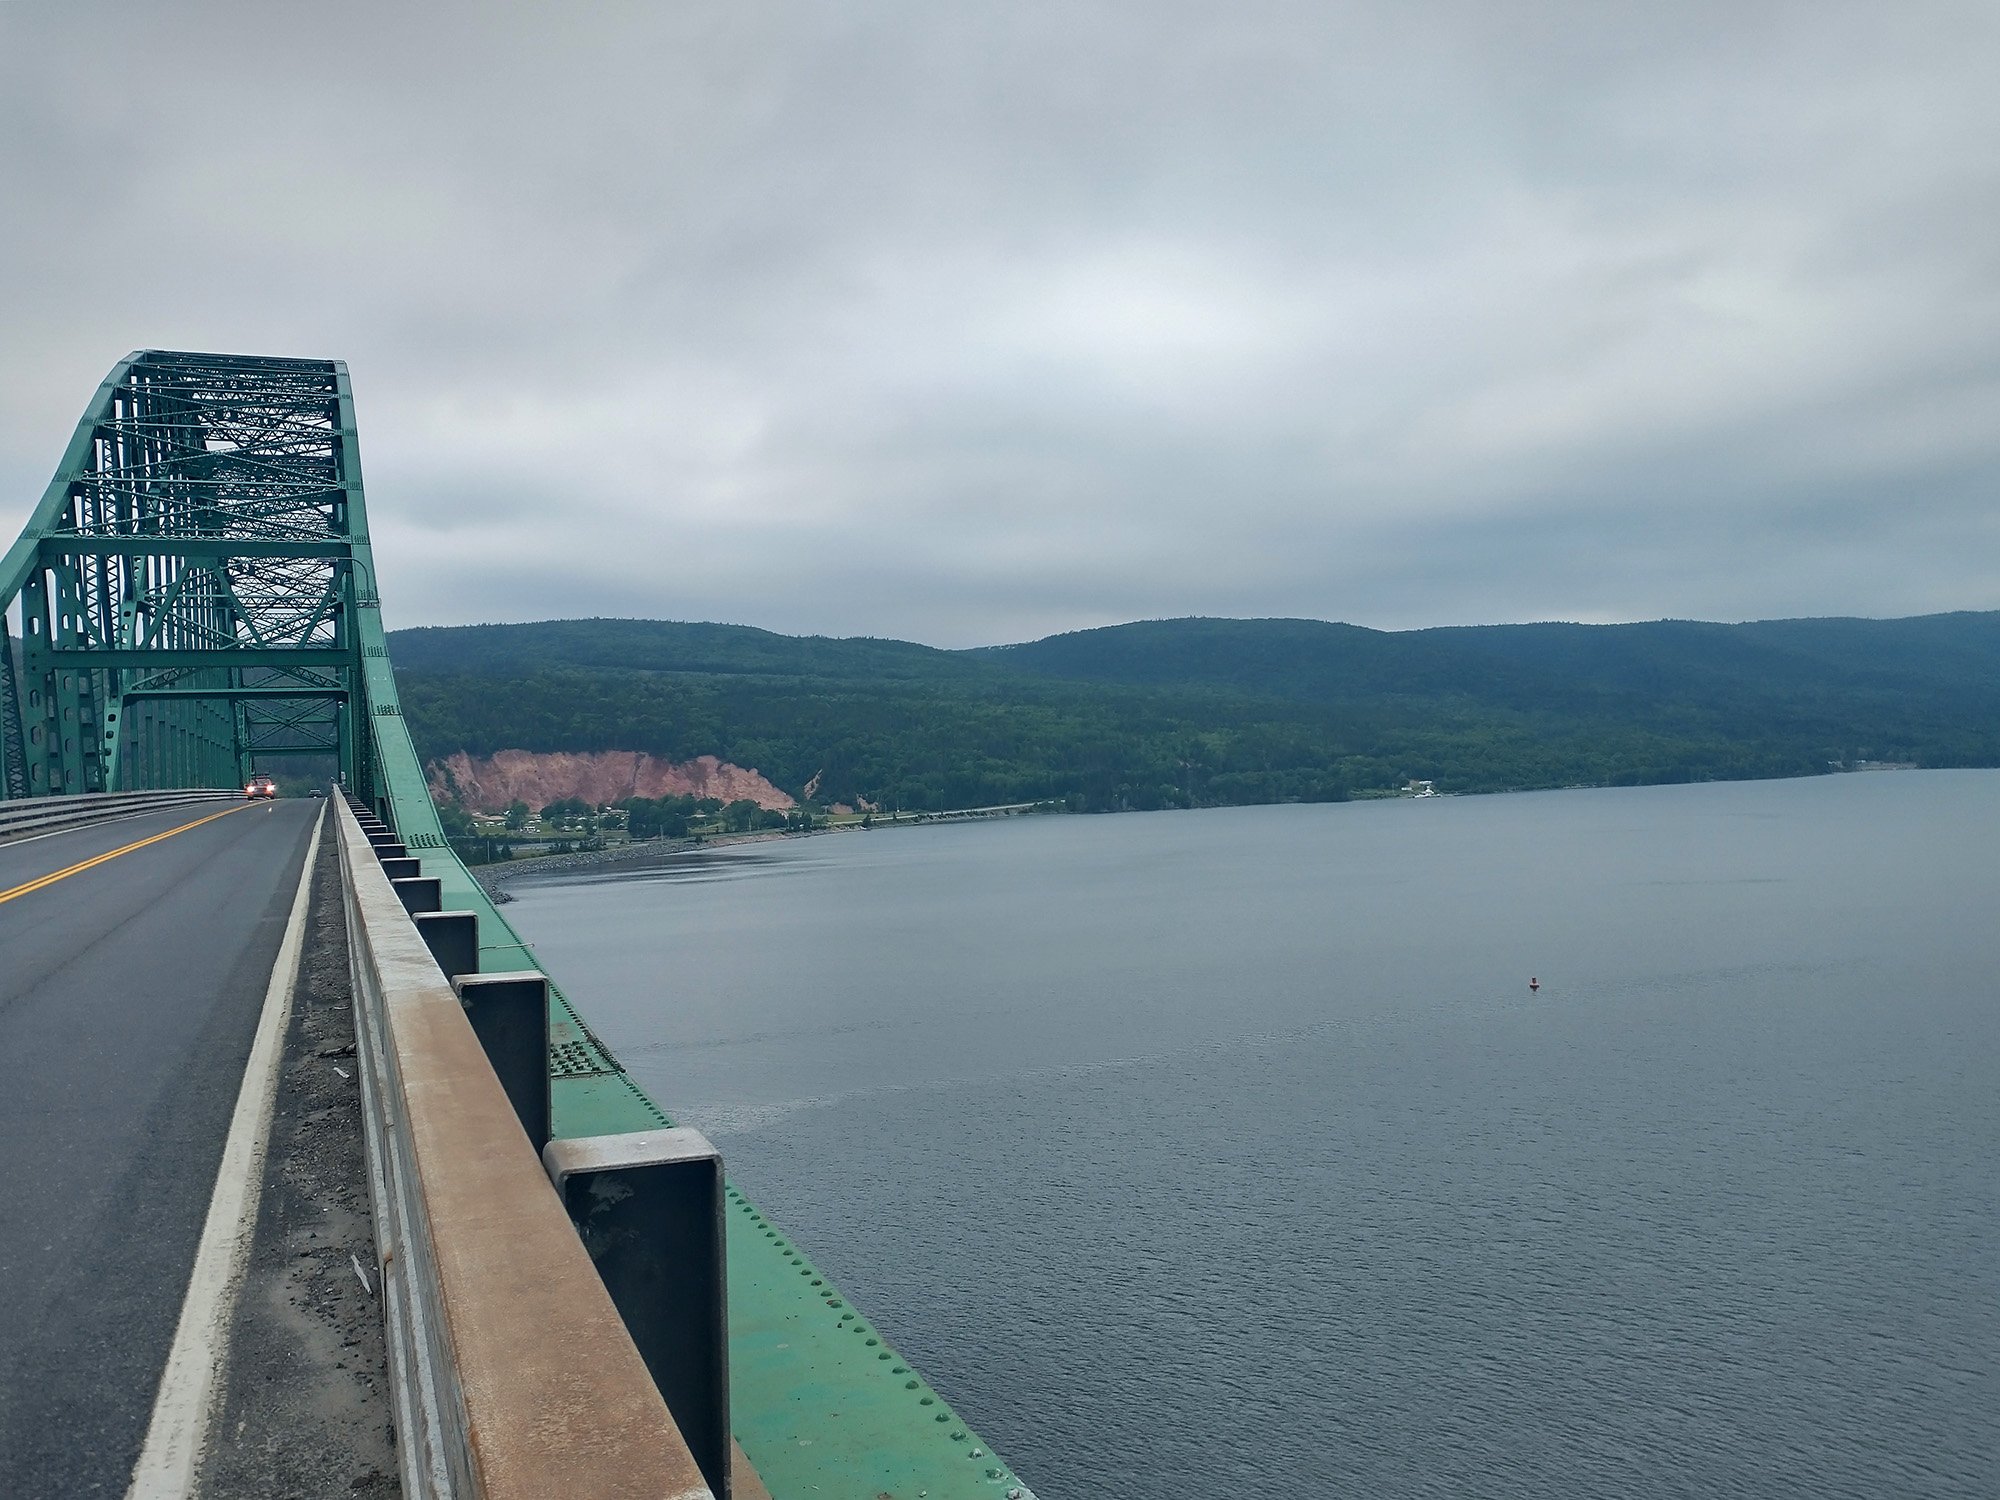 Huge bridge that connects Bras D'Or lake area to the rest of Cape Breton.